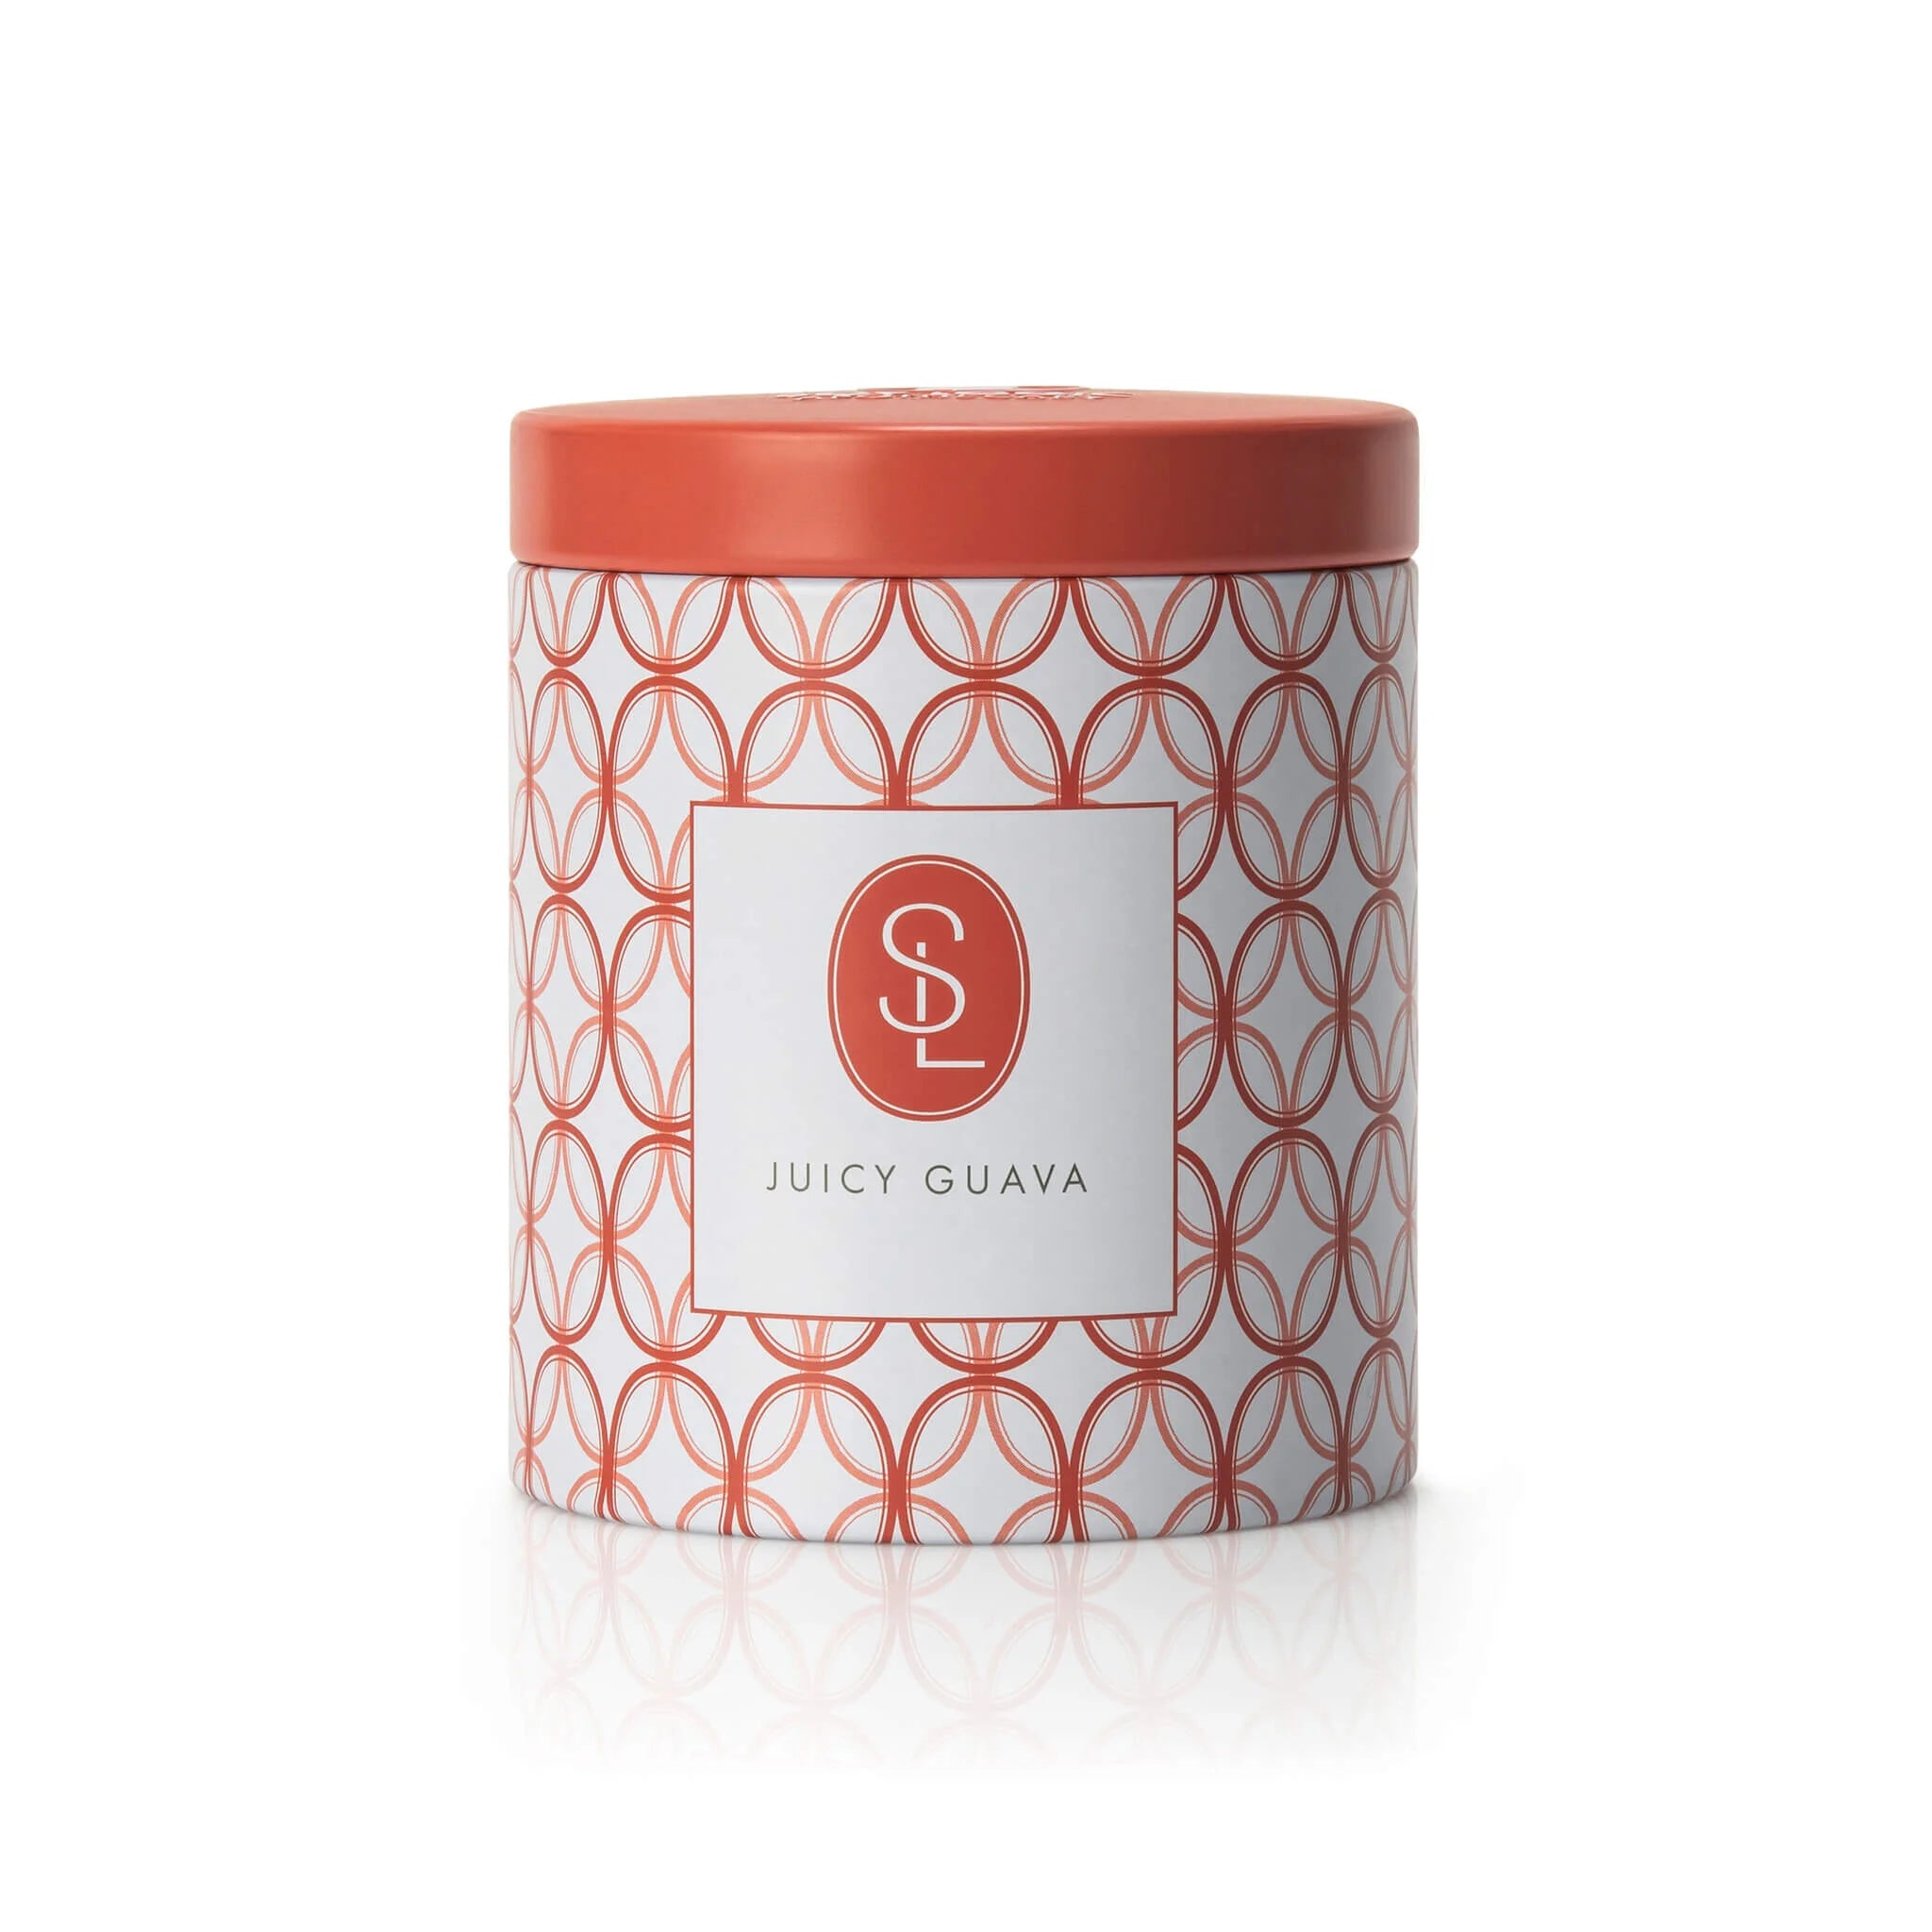 Juicy Guava Minimalist Soy Tin Candle